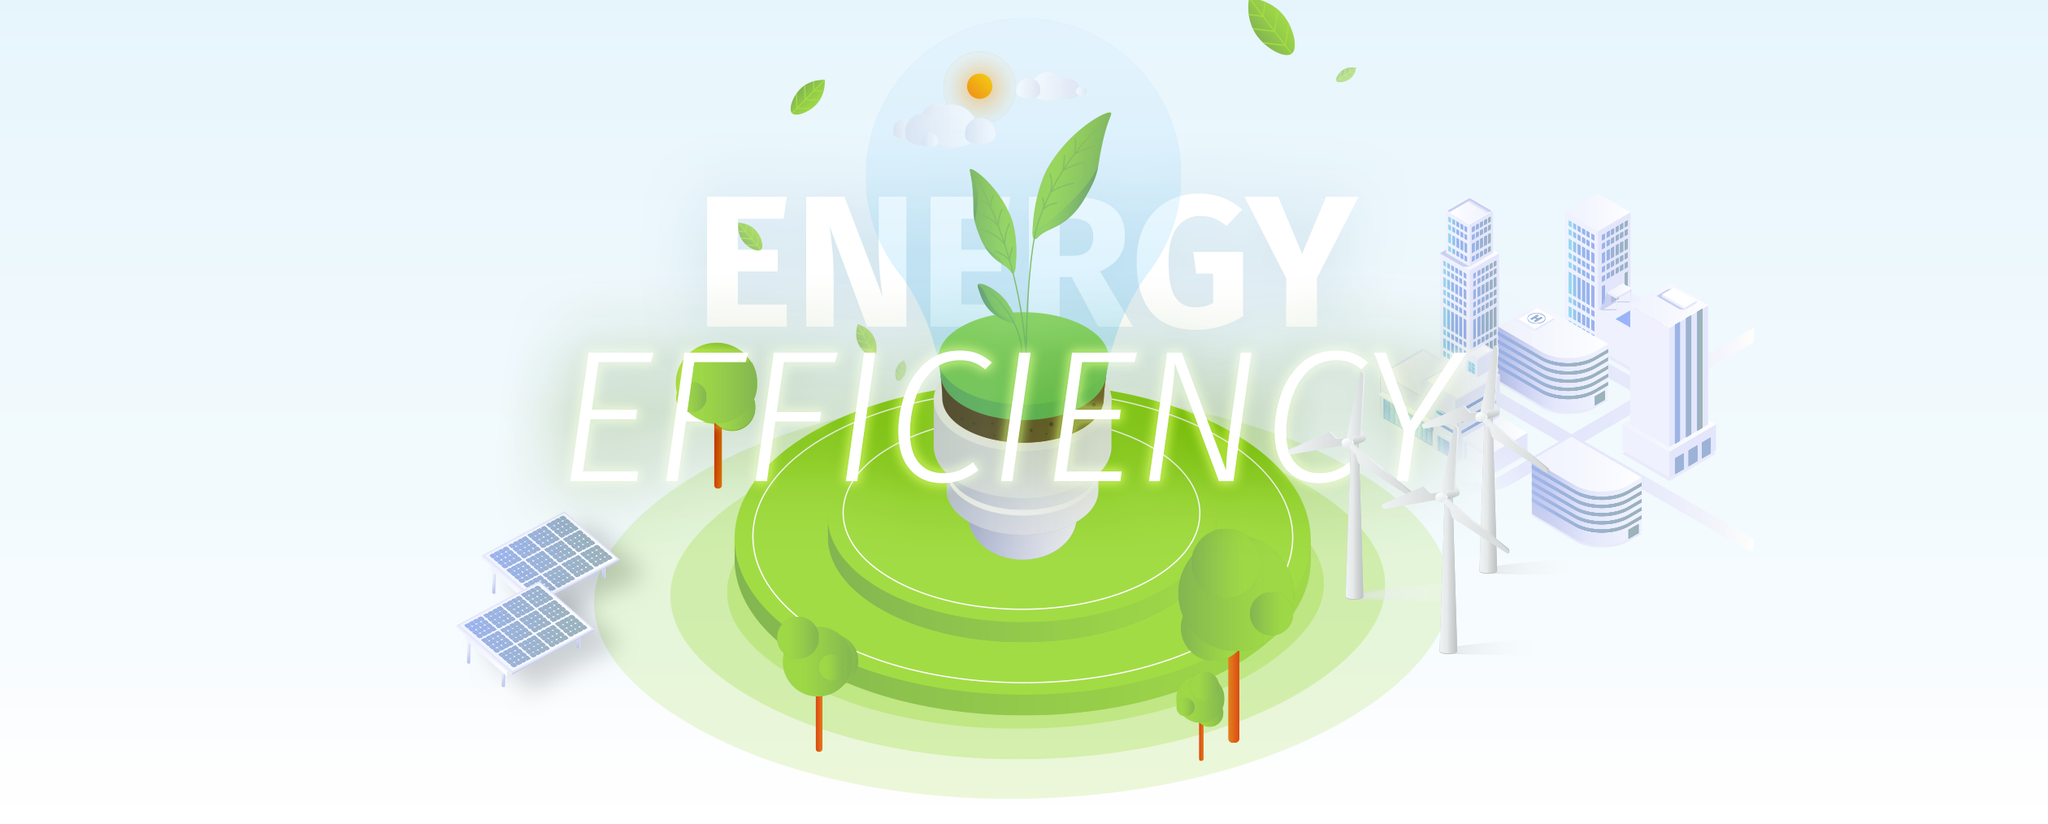 Energy efficiency - the fastest response to the energy crisis